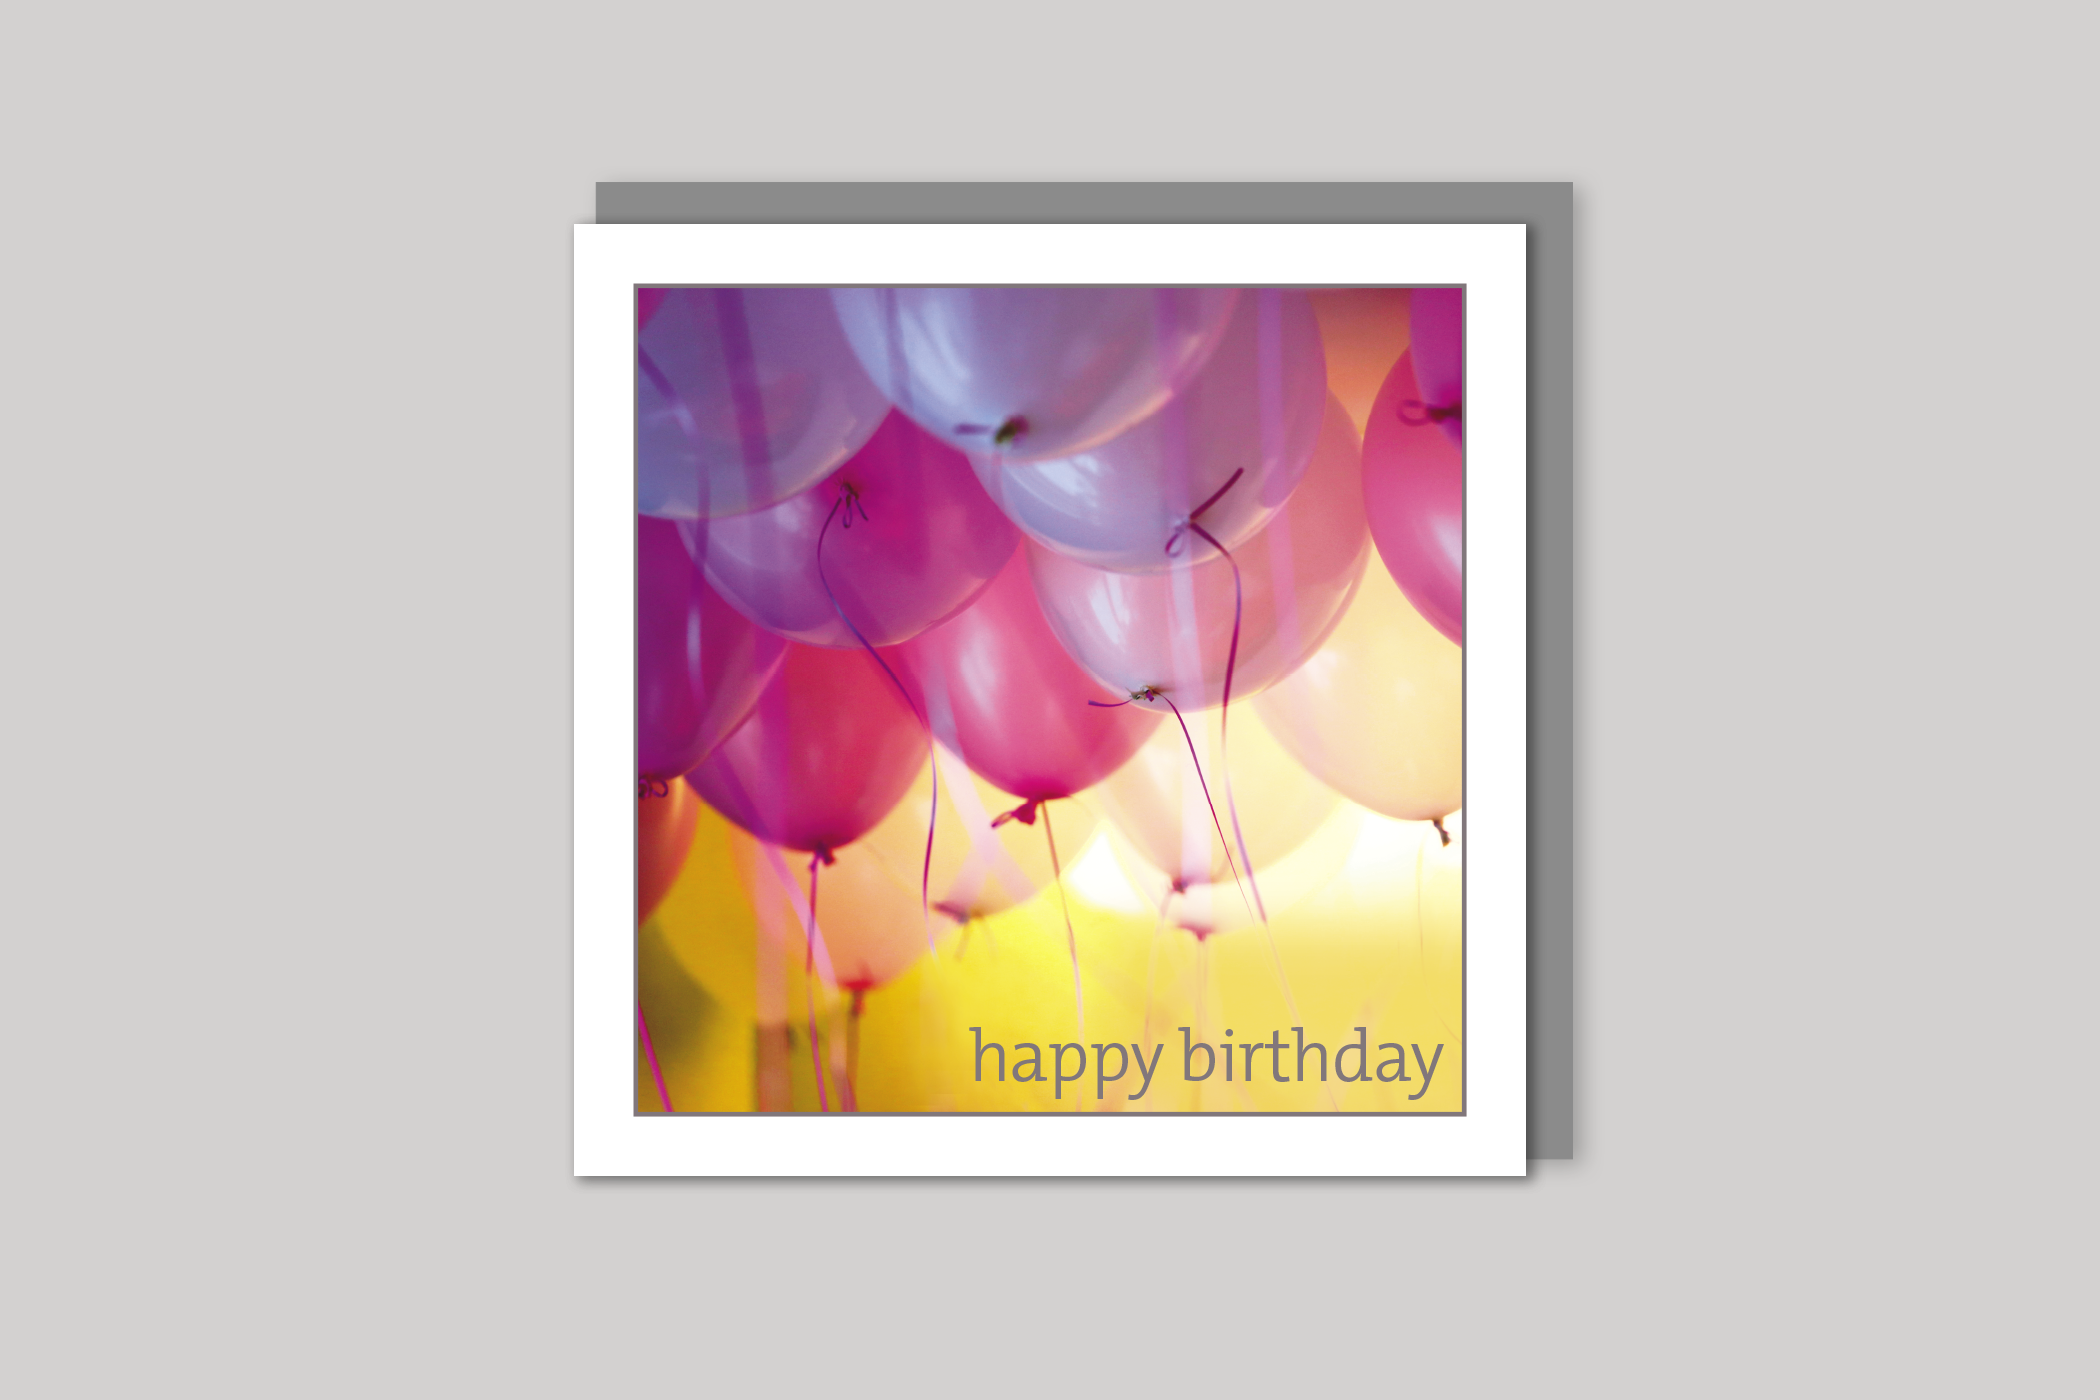 Party Balloons from Exposure Silver Edition range of greeting cards by Icon, back page.